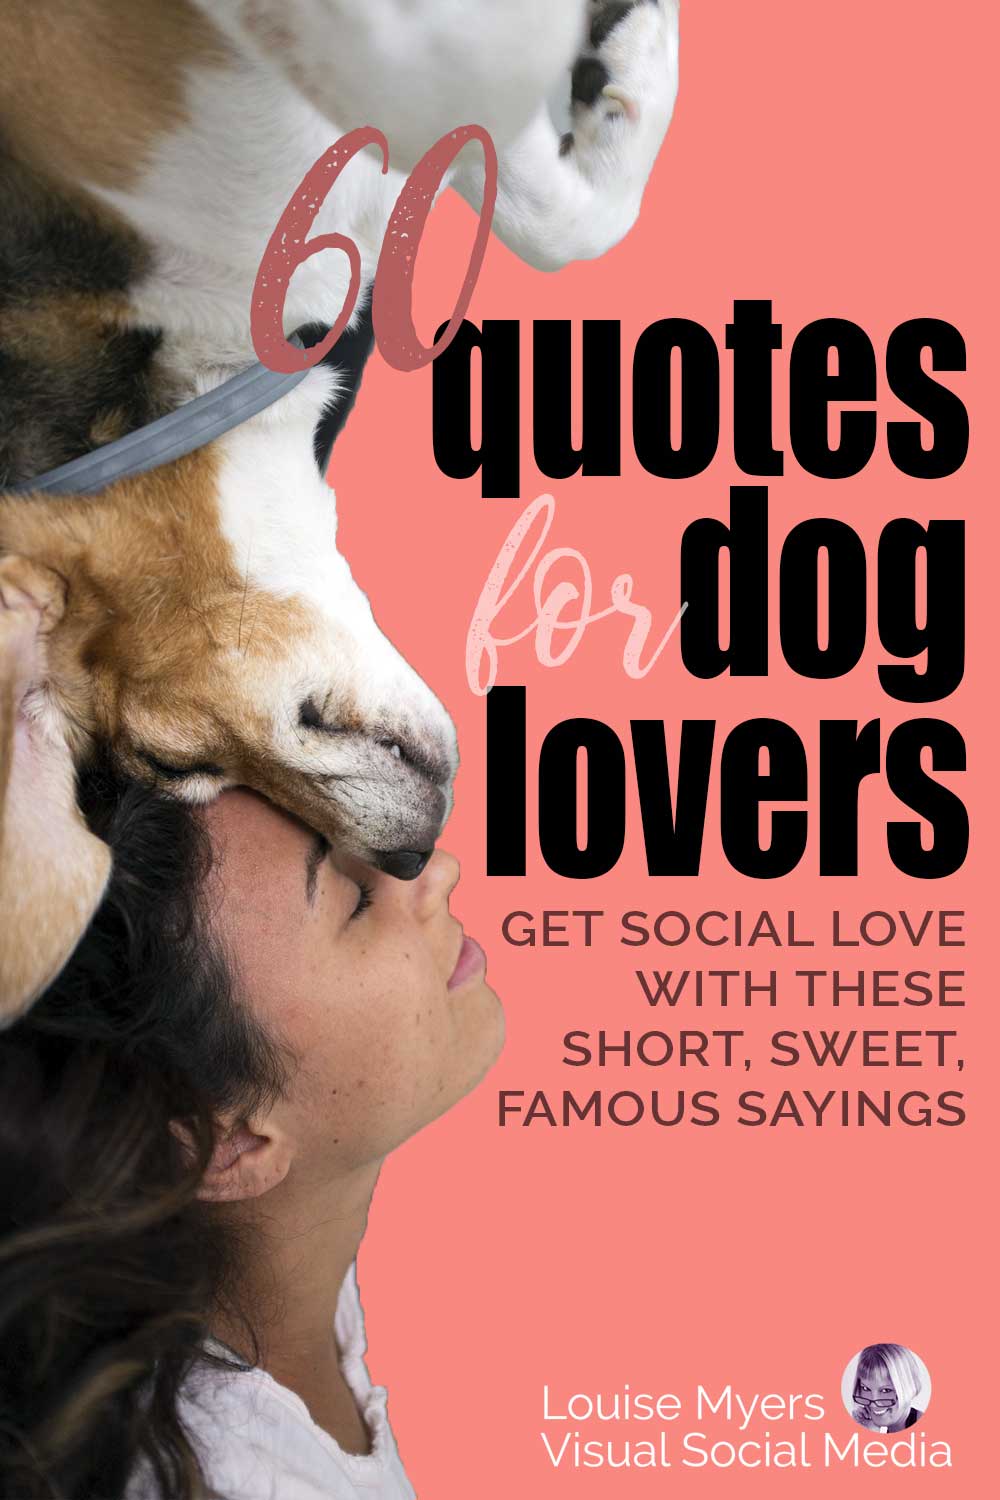 closeup of woman relaxing with dog has text overlay saying quotes for dog lovers, get social love with these short sweet famous sayings.